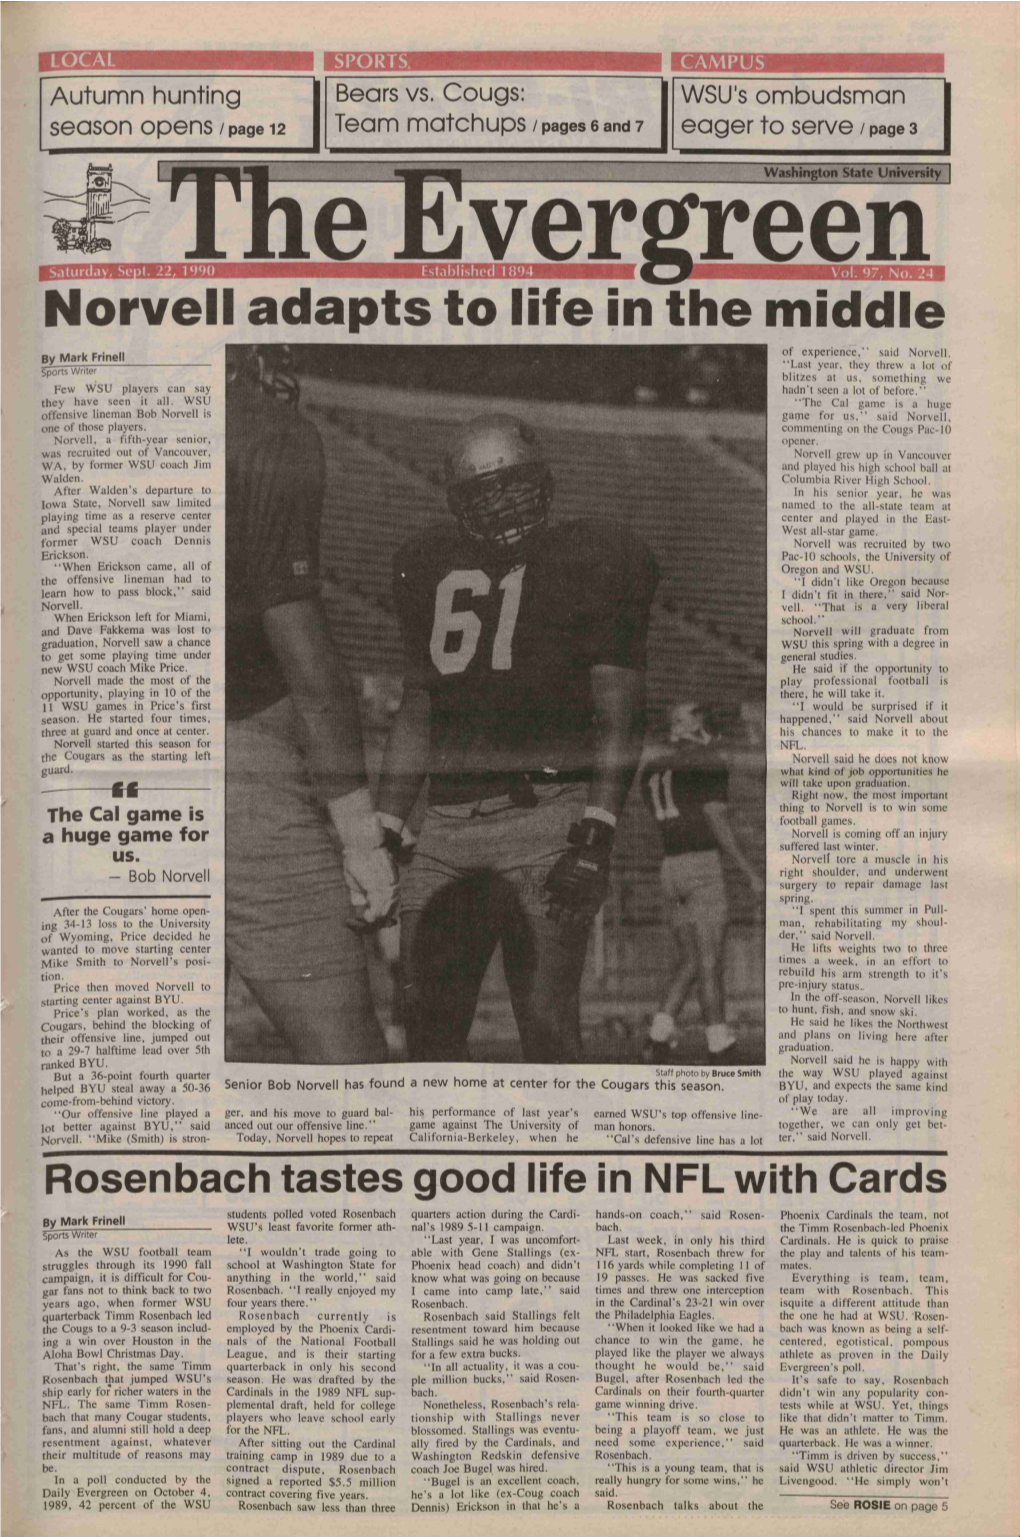 Norvell Adapts to Life in the Middle